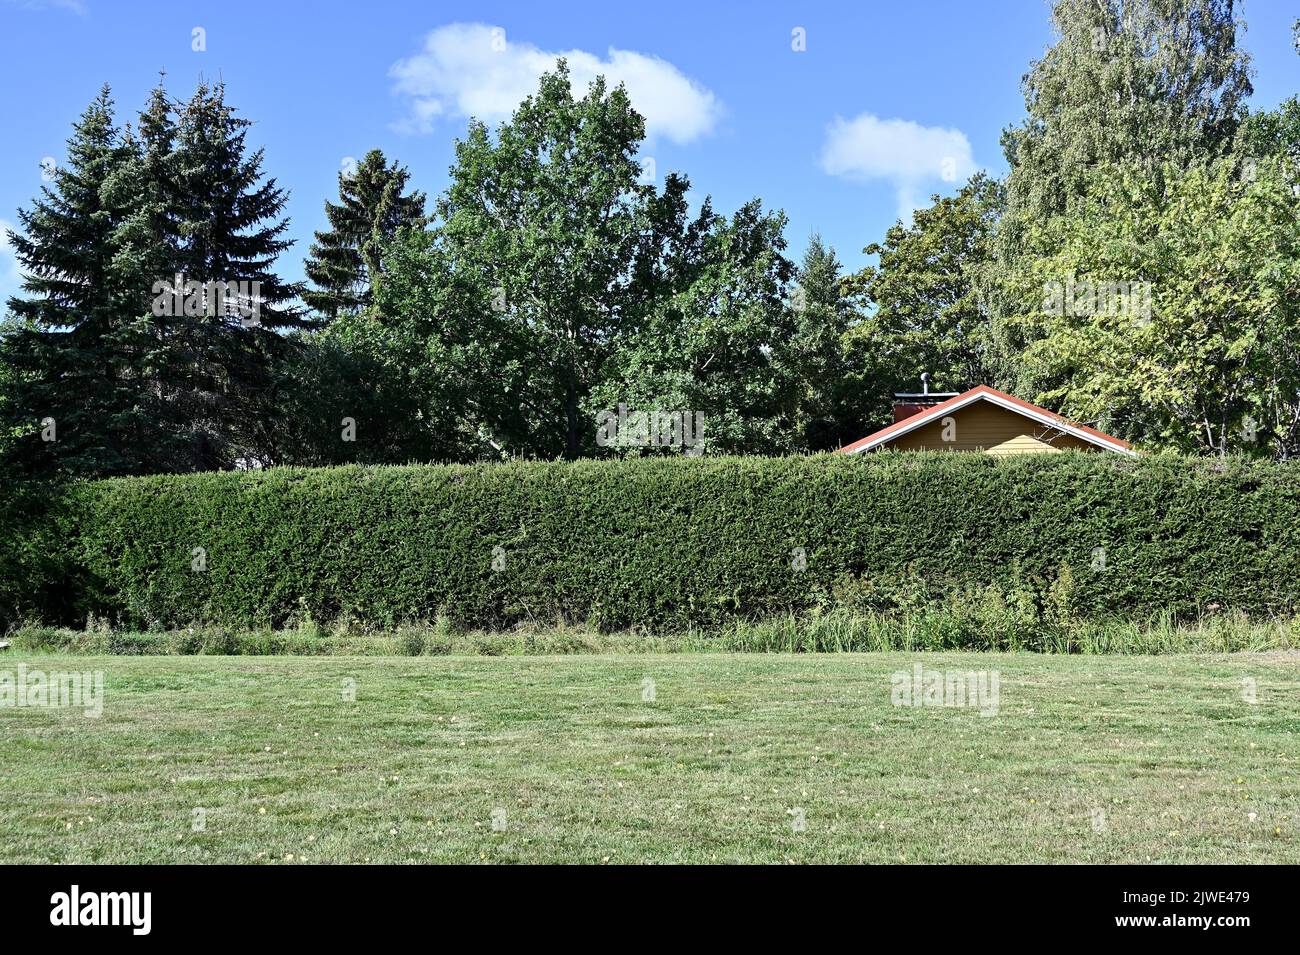 the roof of the house is visible behind the green hedge, deadpan photography Stock Photo